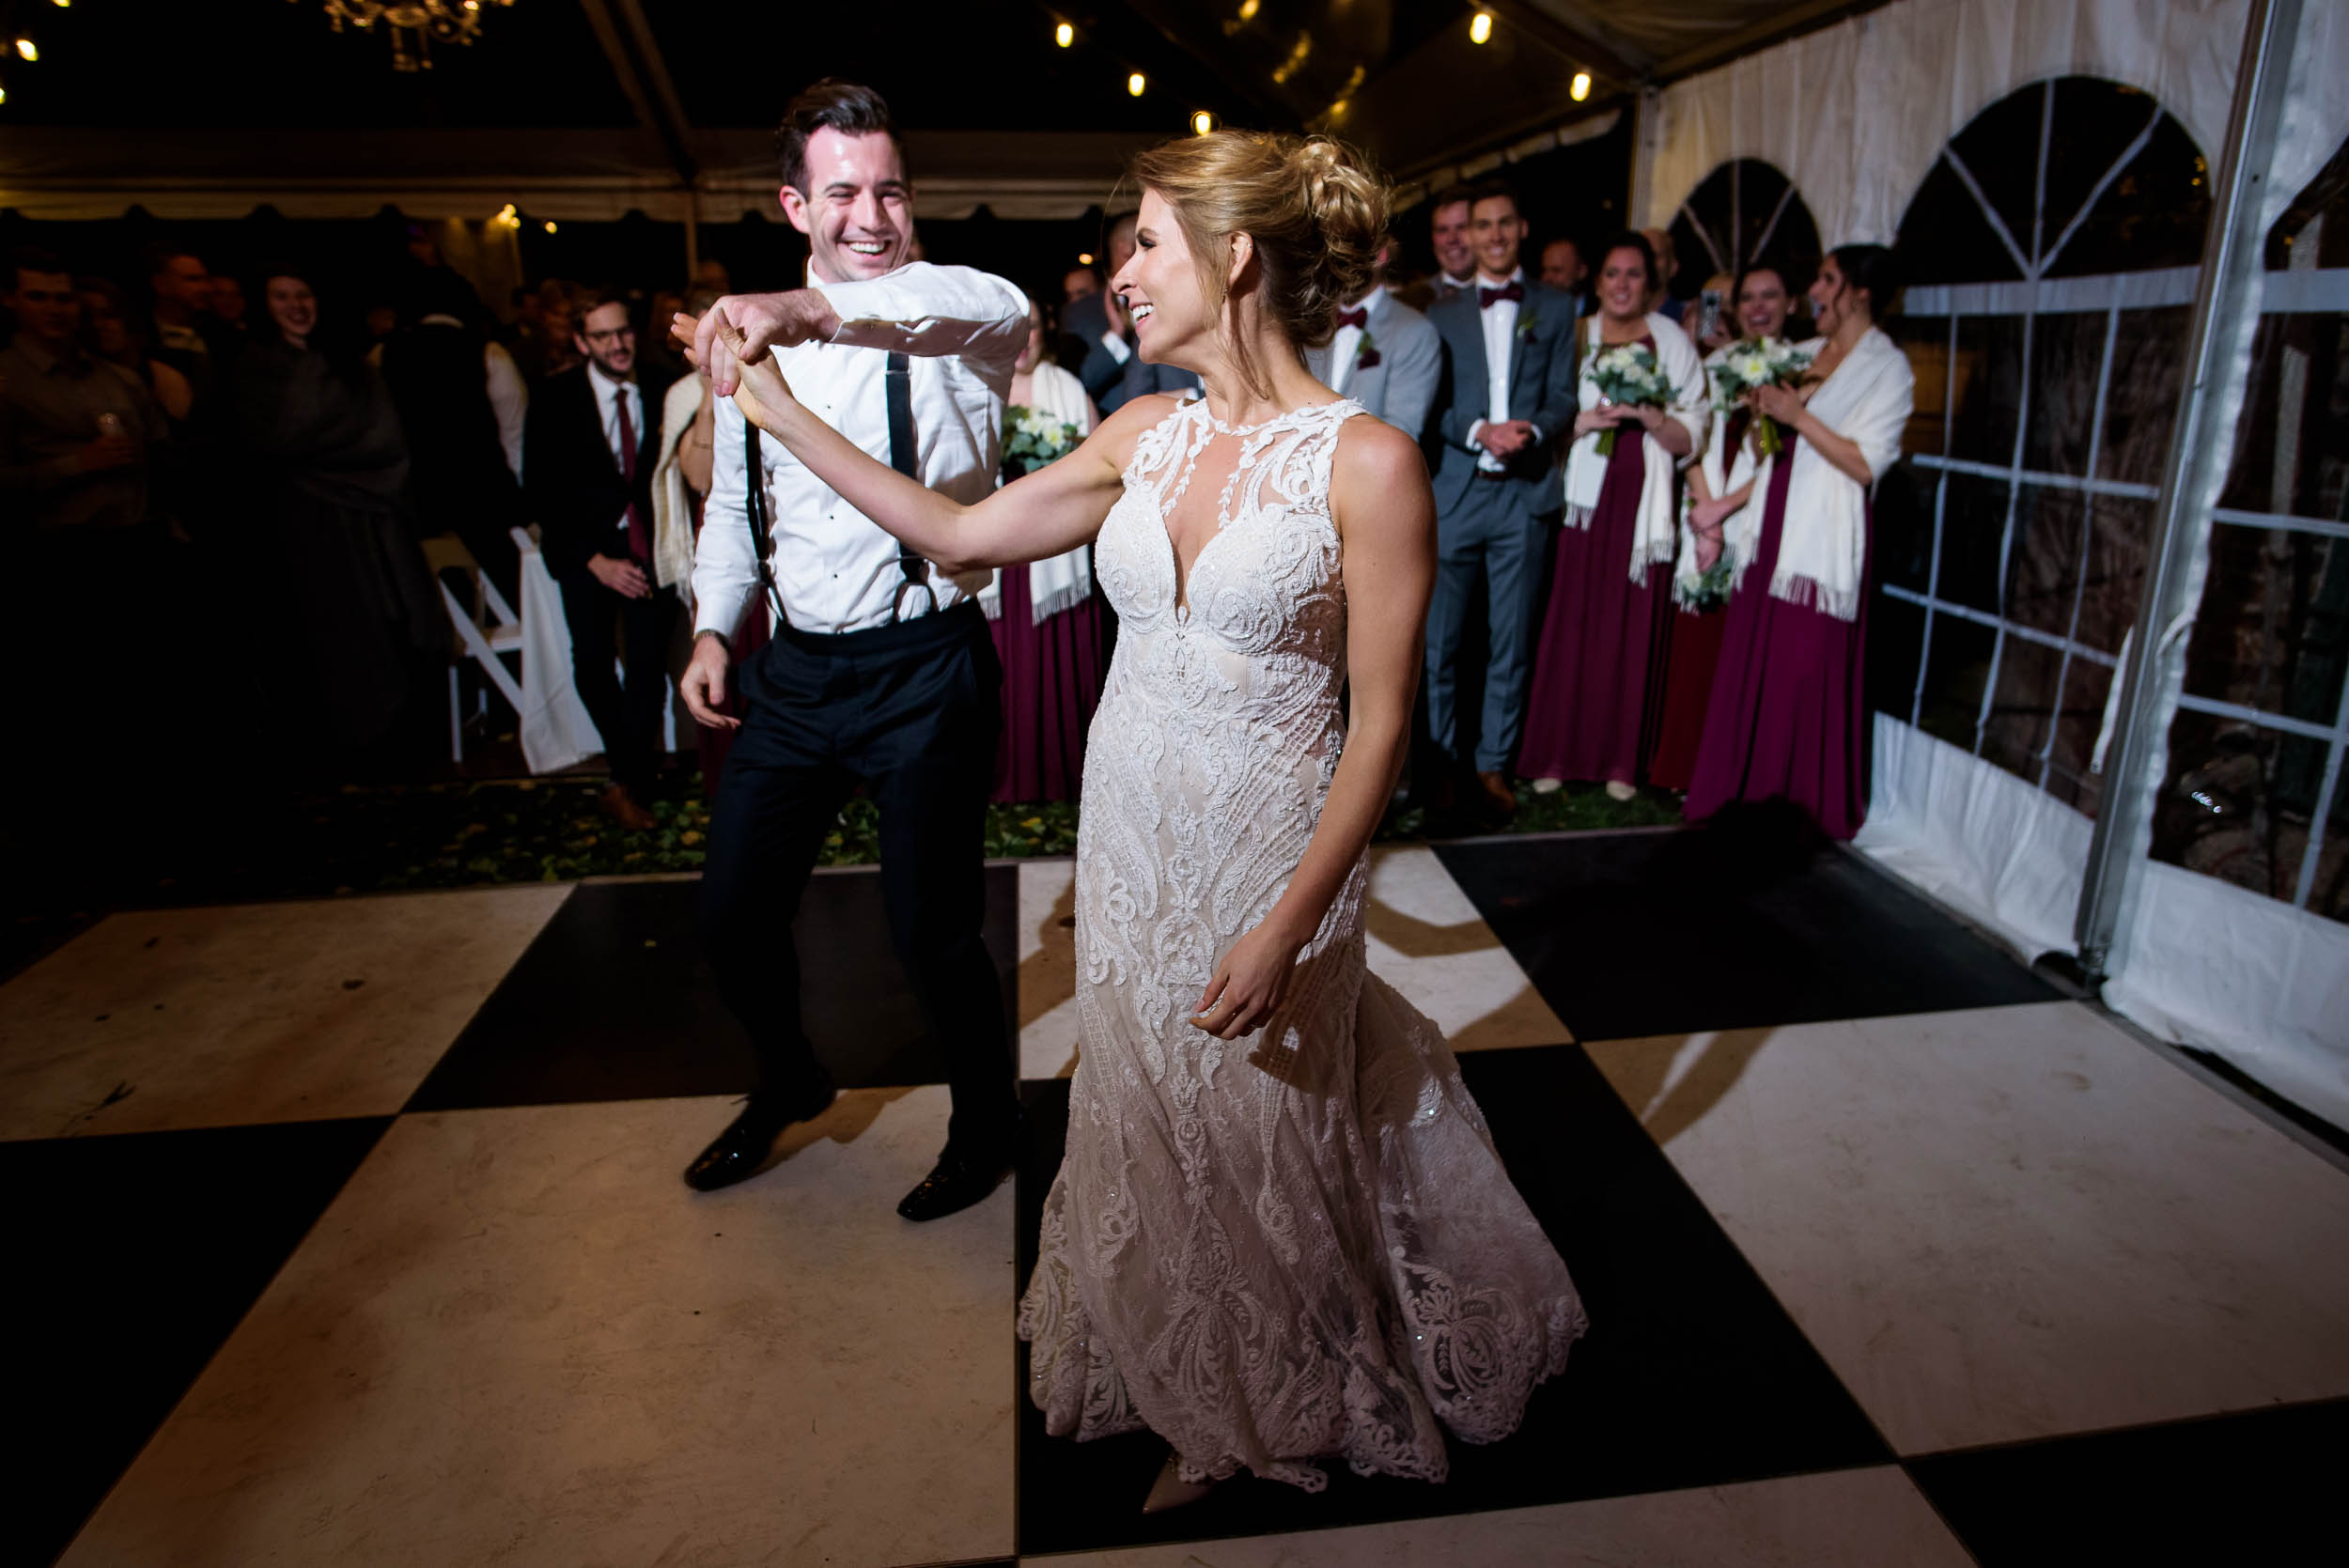 Bride and groom first dance during a Glessner House Chicago wedding.